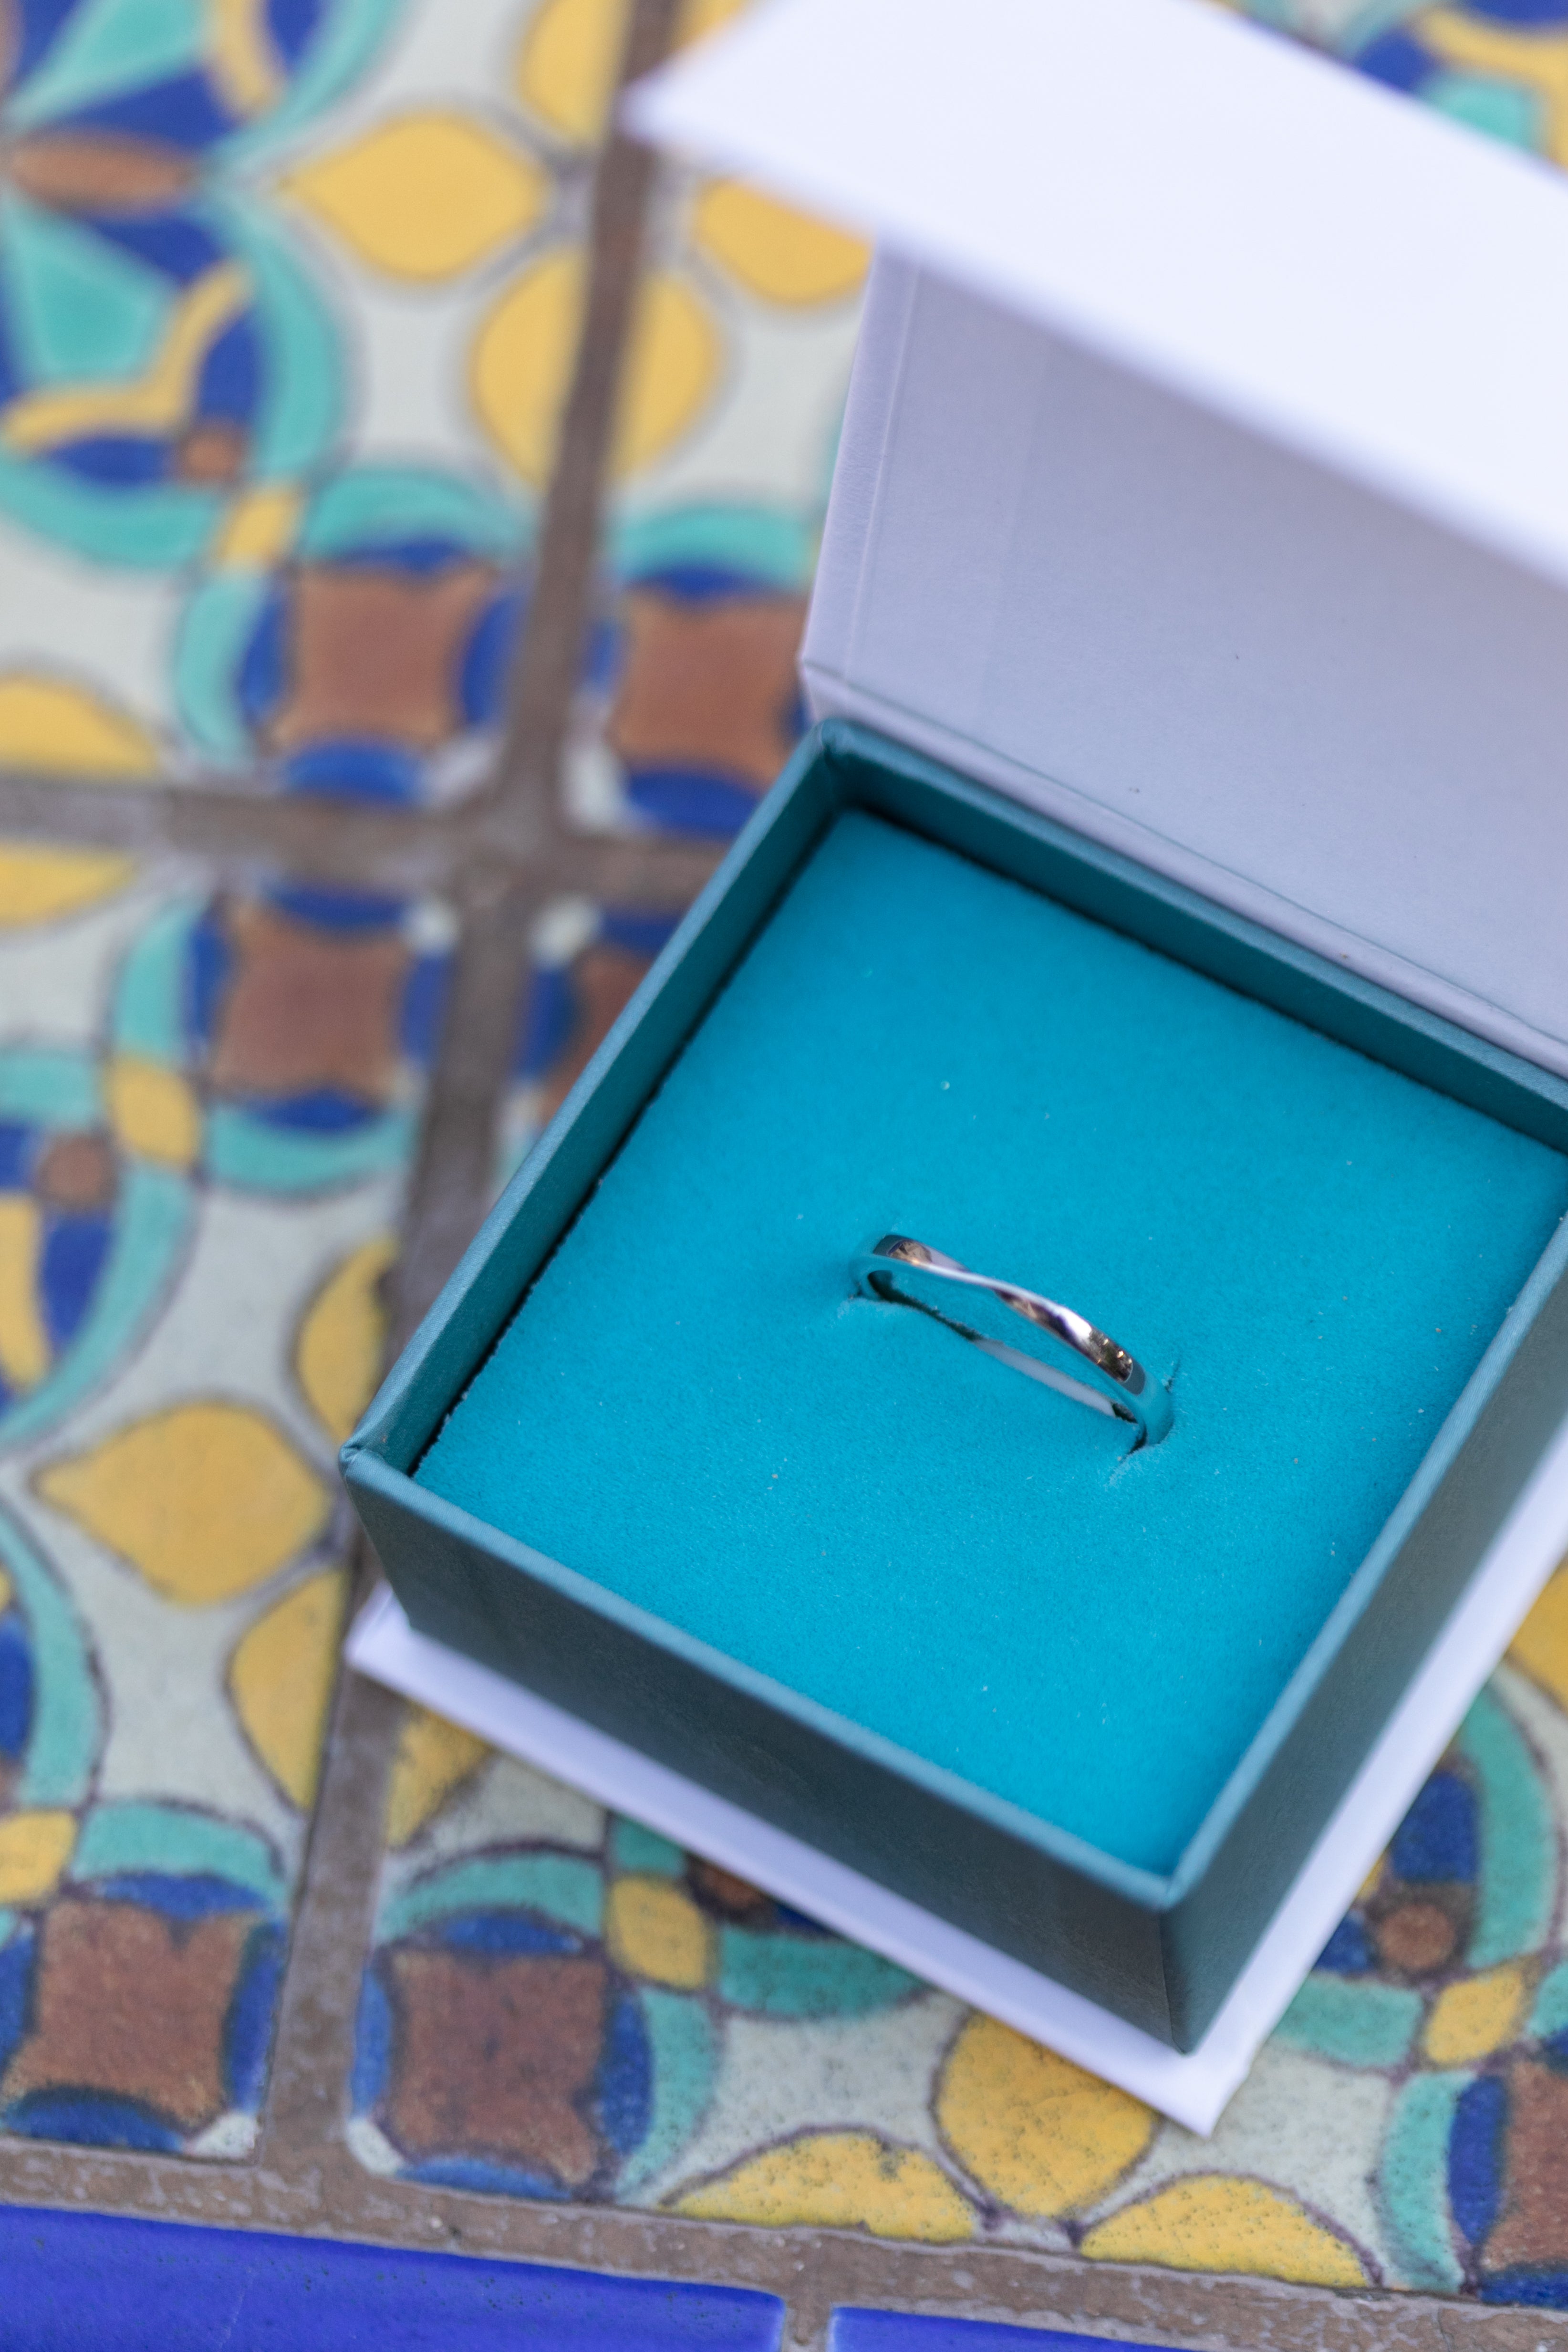 A close up of a silver twist ring in a Chouette Designs branded teal and white ring box, sitting on top of colorful Spanish style tile.